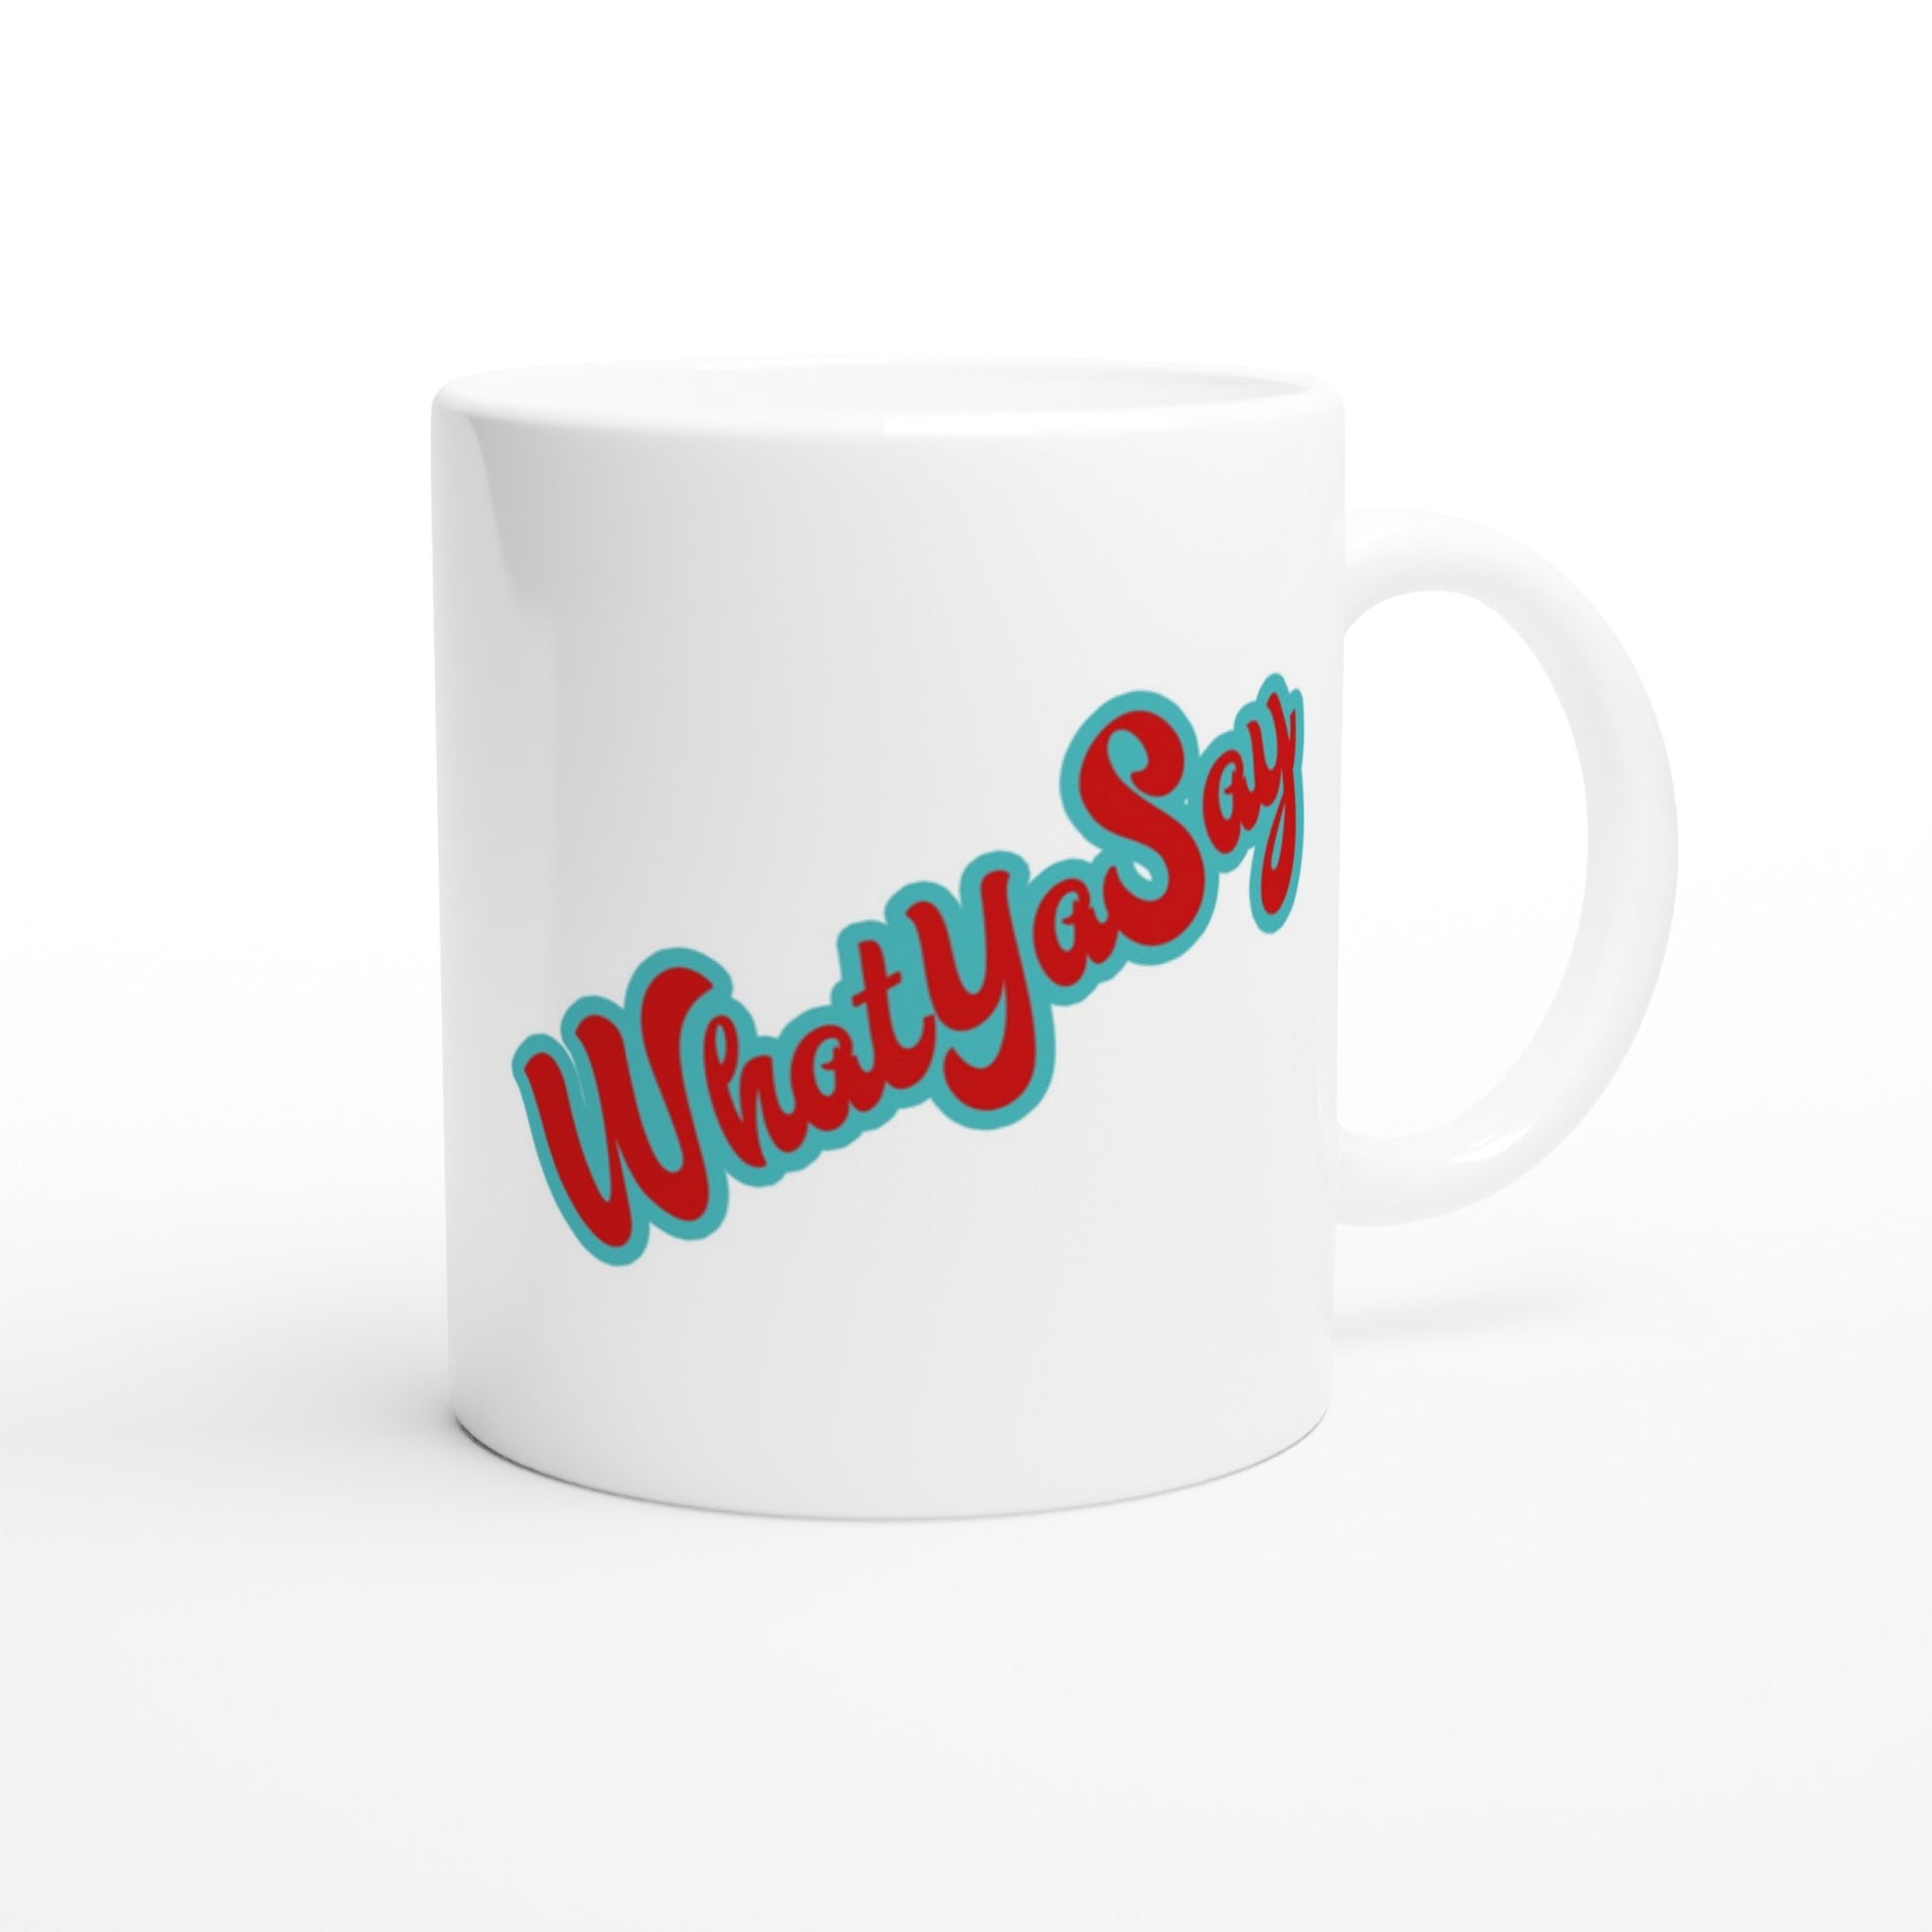 Personalized white ceramic 11oz mug with motto I Got 99 Problems but a Margarita Aint One on the front and WhatYa Say logo on the back dishwasher and microwave safe ceramic coffee mug from WhatYa Say Apparel back view.